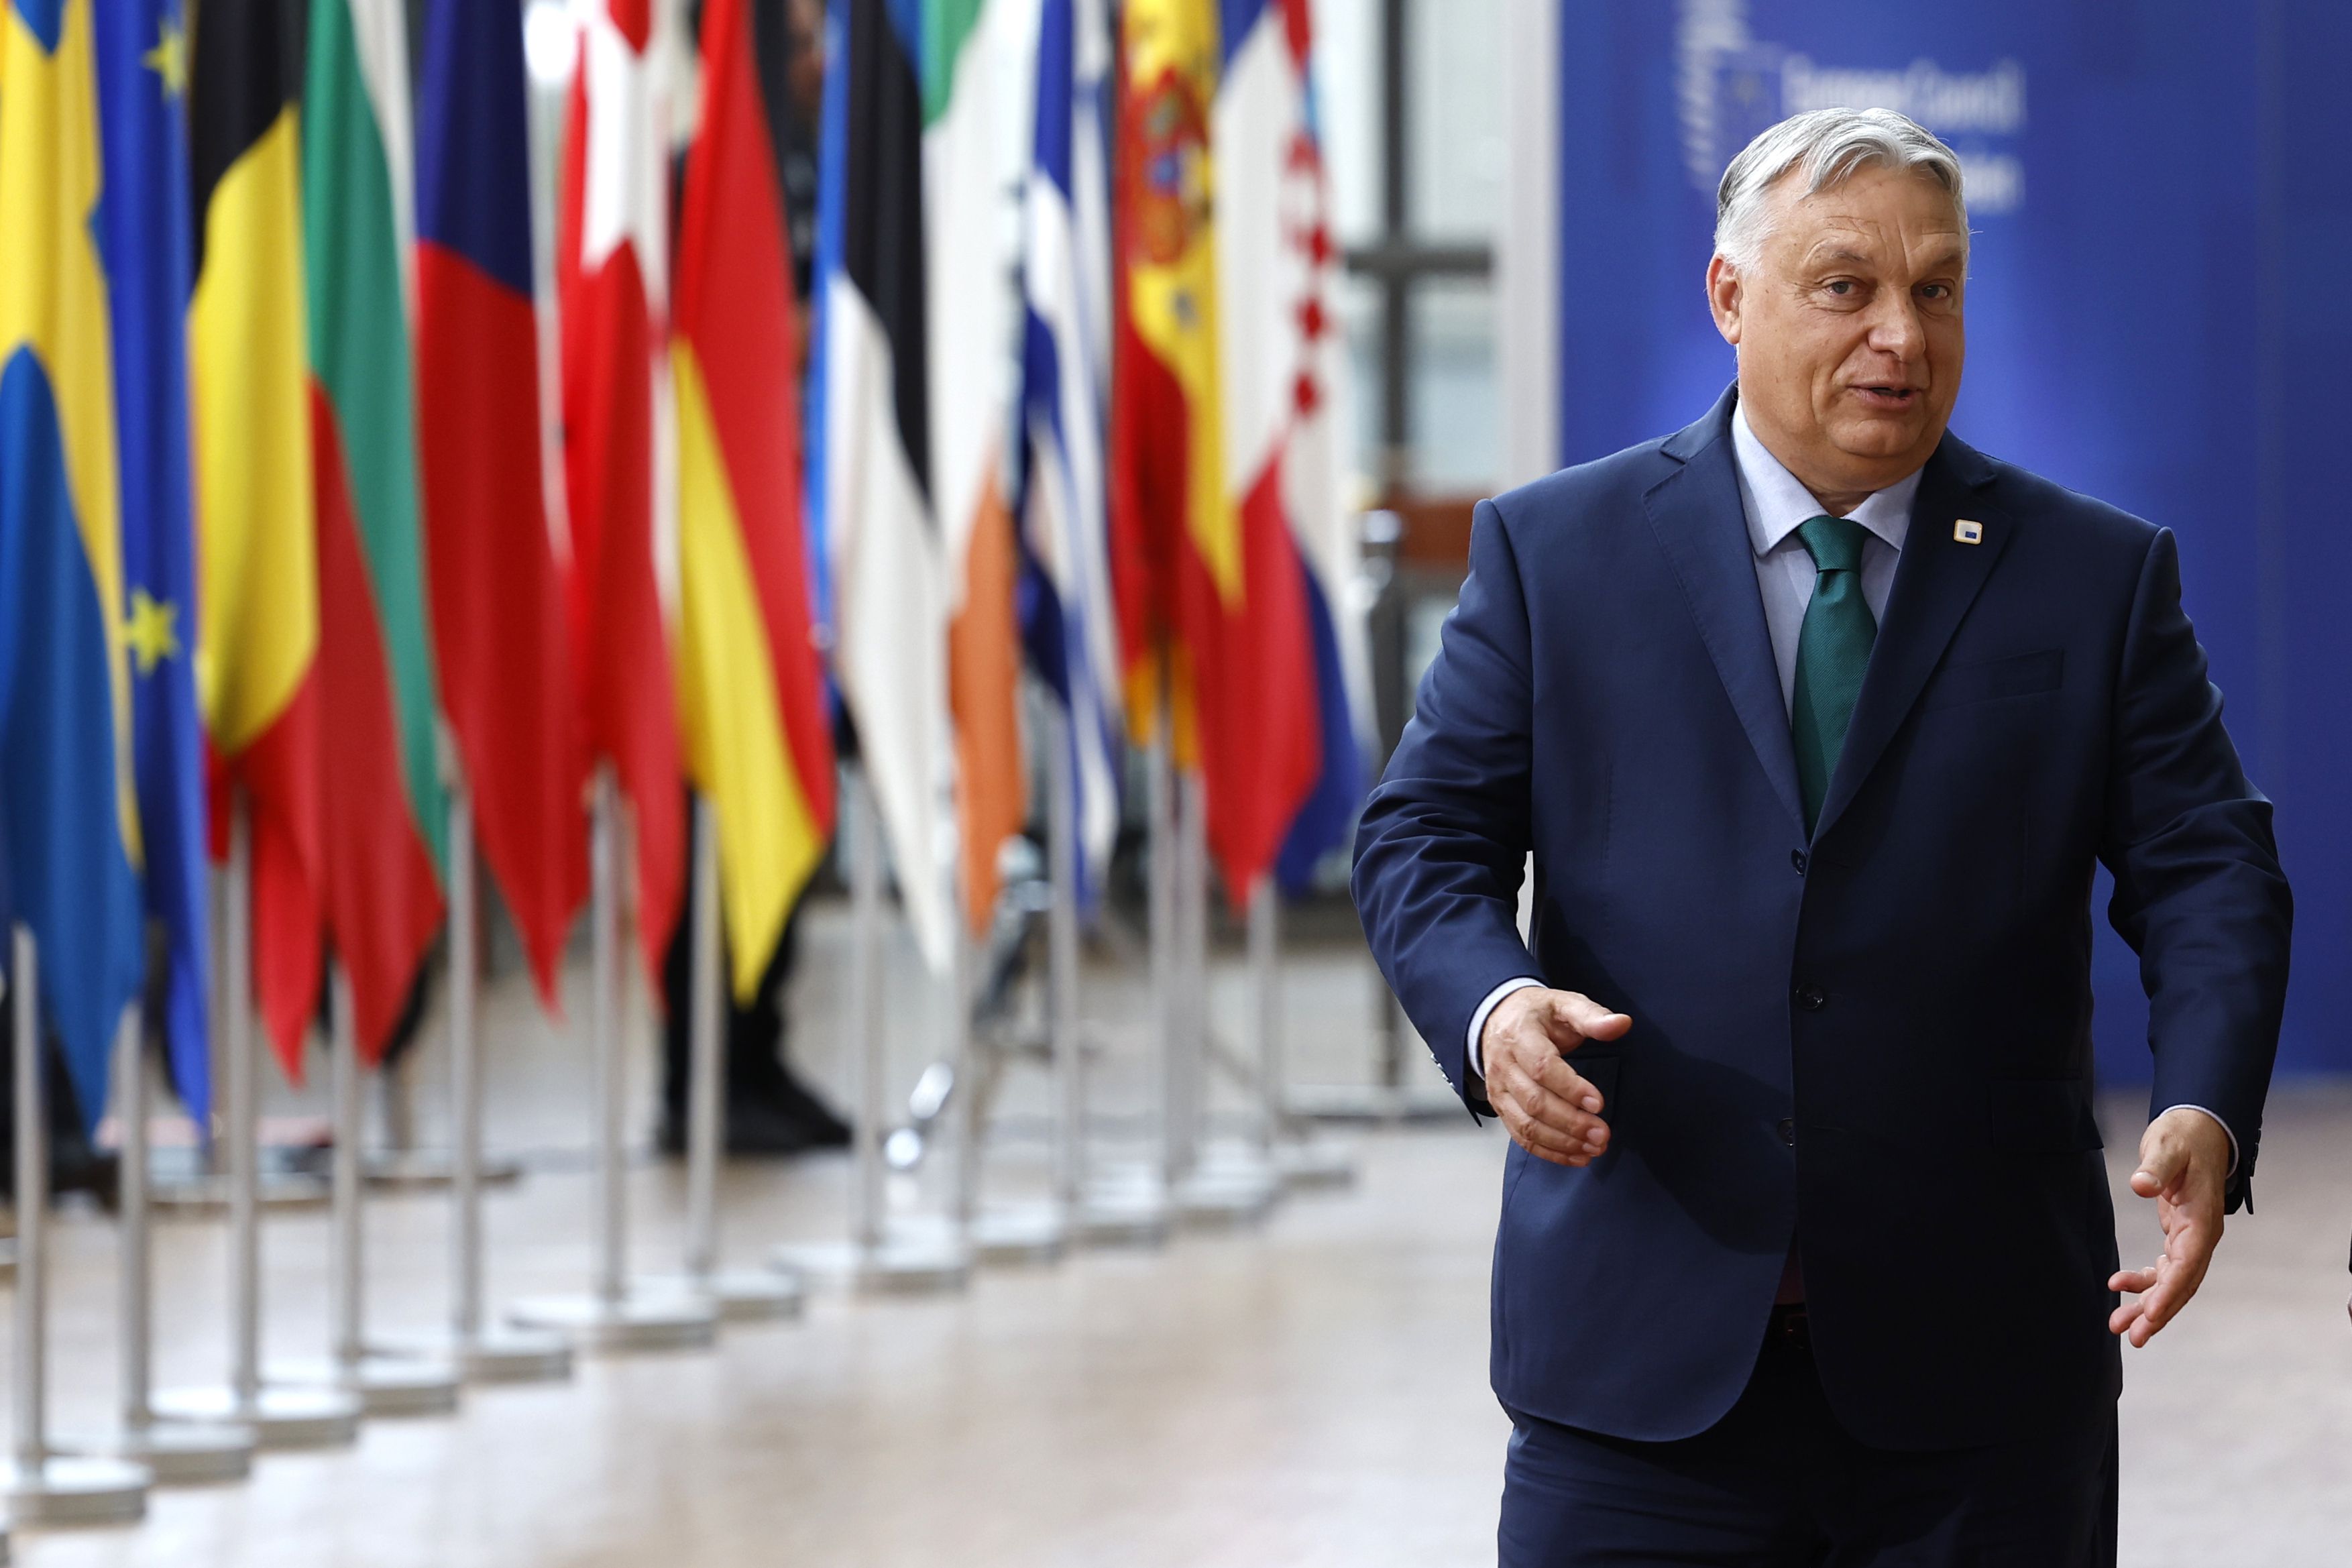 Hungary's Orbán presents a new alliance with Austrian and Czech nationalist parties thumbnail